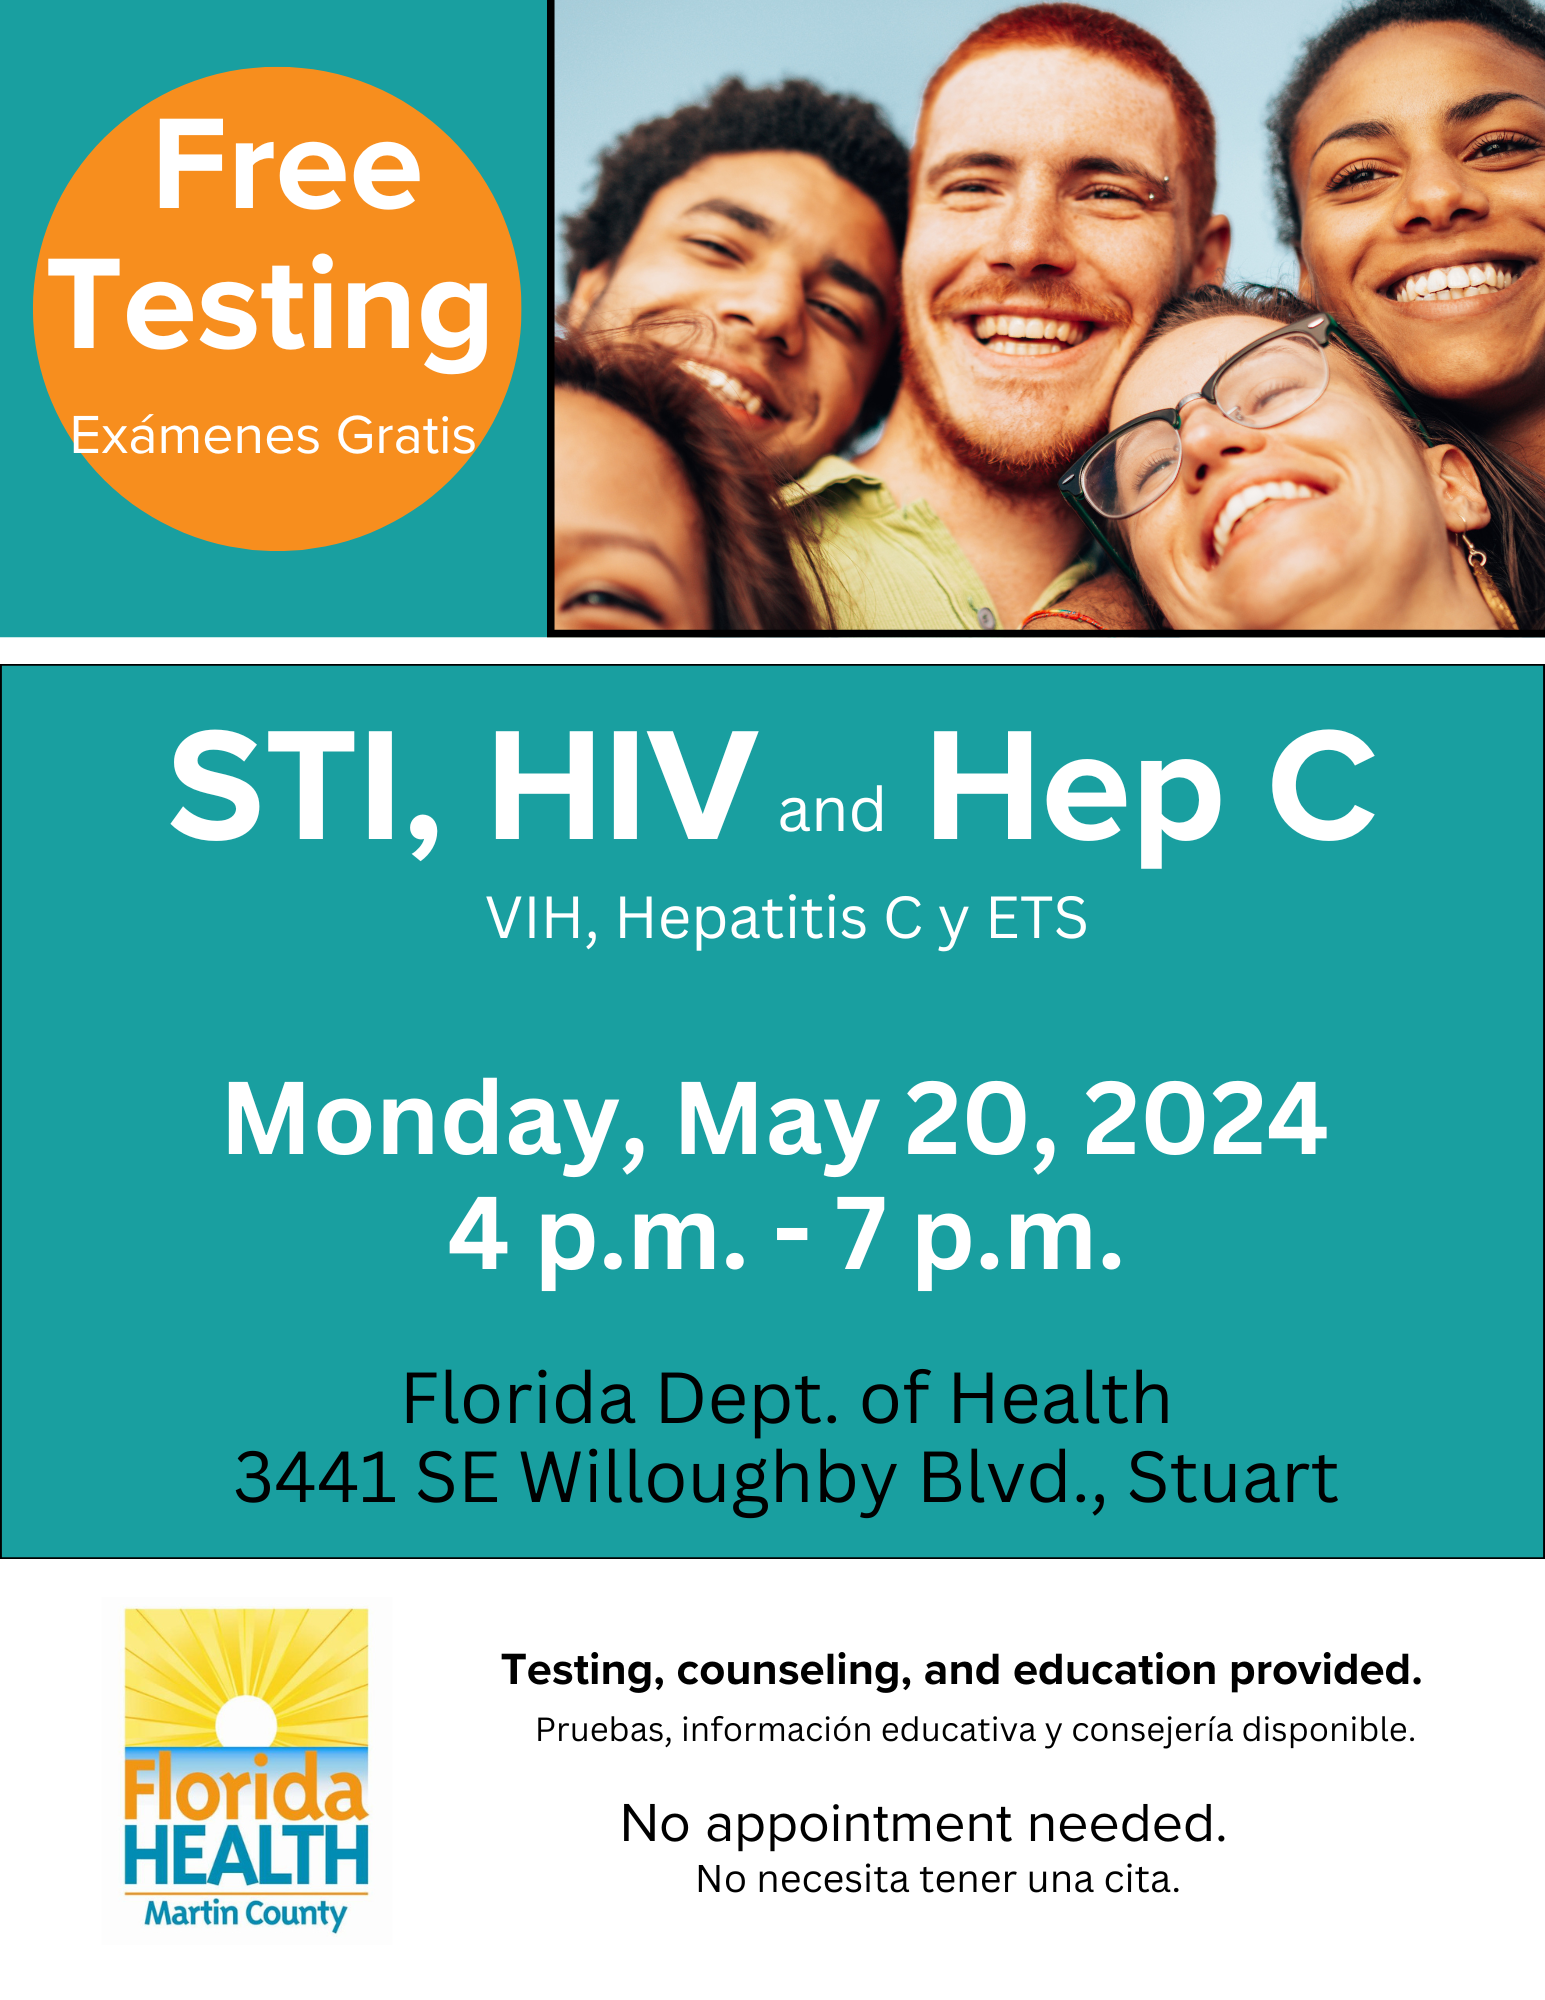 Free Testing -STI, HIV and Hep C – Monday, May 20, 2024 – Florida Department of Health – 3441 SE Willoughby Blvd. – Testing, Counseling, and Education provided. No appointment needed.